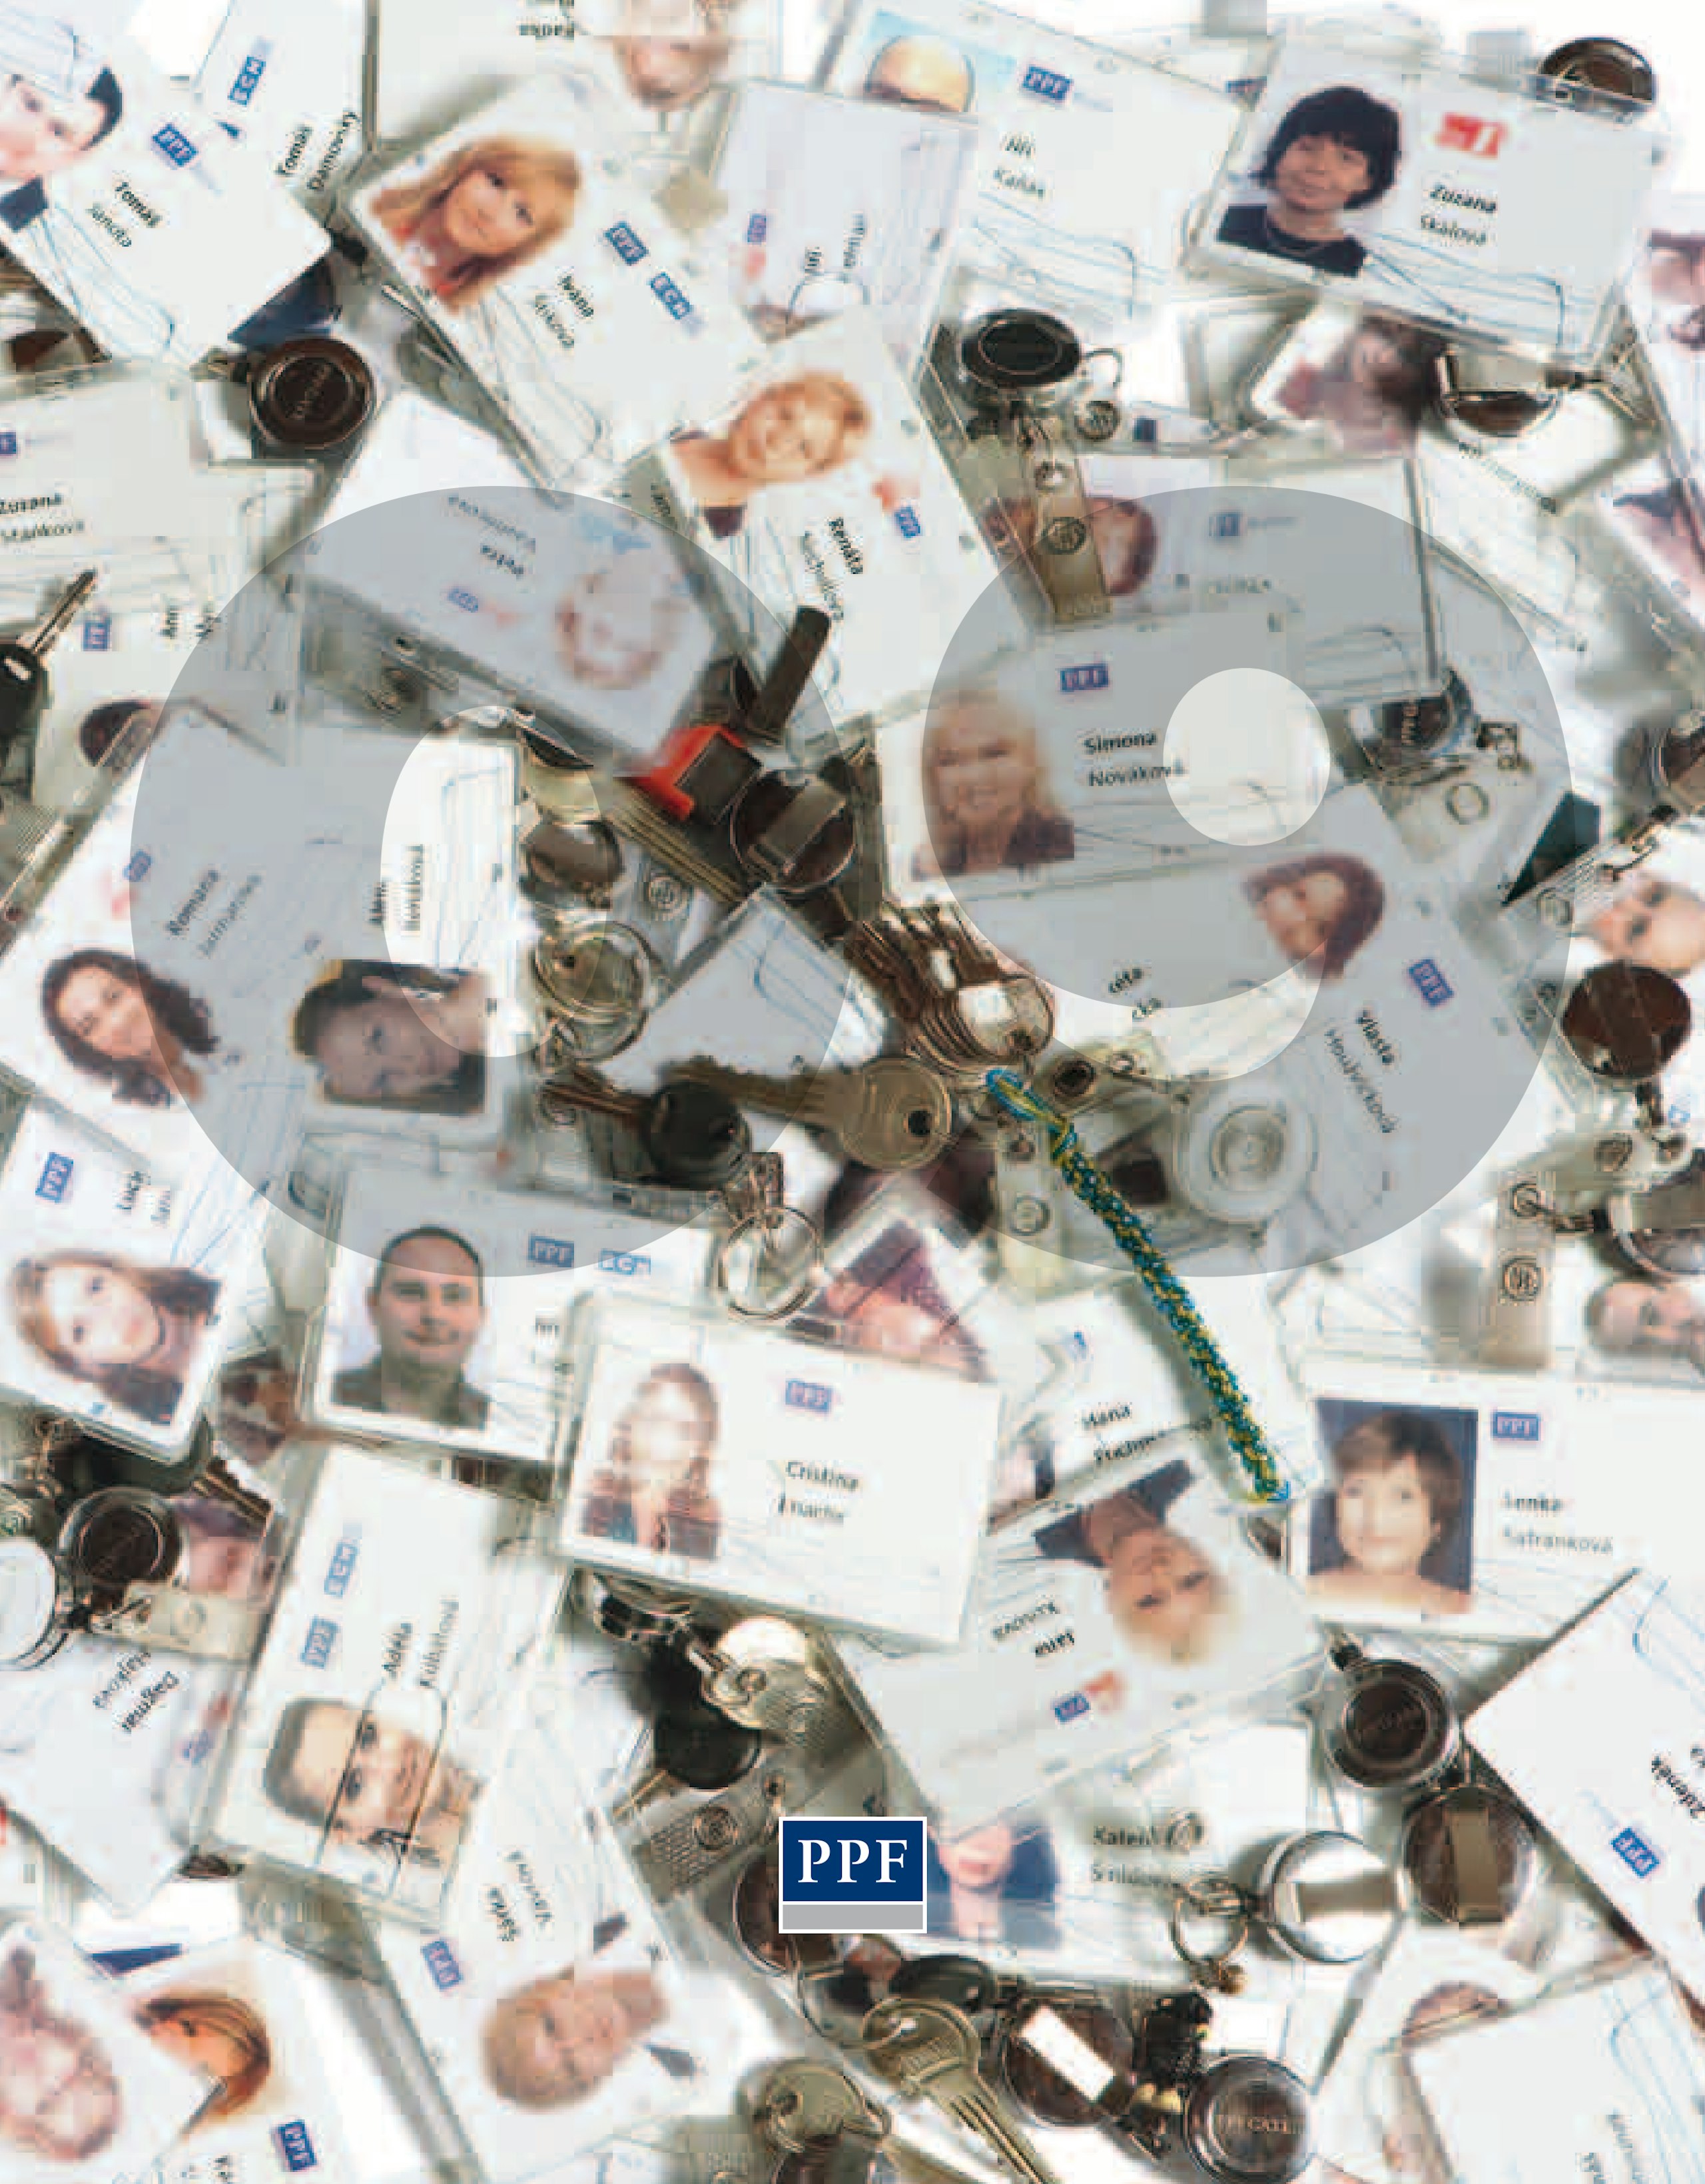 PPF Group Annual Report 2009